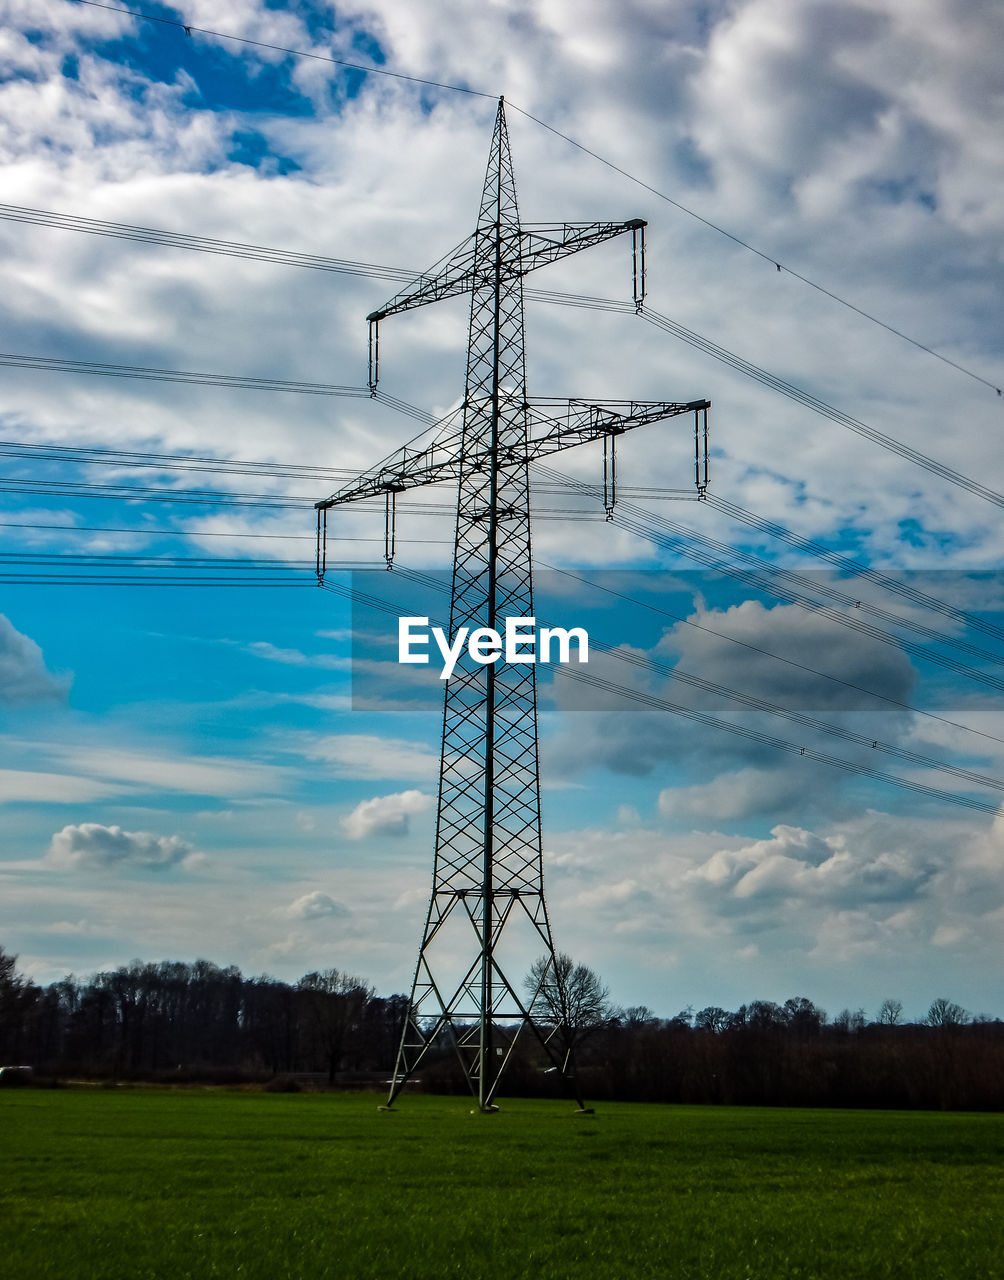 sky, technology, electricity, cloud, power generation, electricity pylon, cable, power supply, transmission tower, nature, tower, overhead power line, plant, environment, power line, landscape, no people, grass, land, field, built structure, wind, outdoors, architecture, rural scene, outdoor structure, agriculture, silhouette, tree, scenics - nature, environmental conservation, day, electrical supply, industry, mast, electrical grid, metal, blue